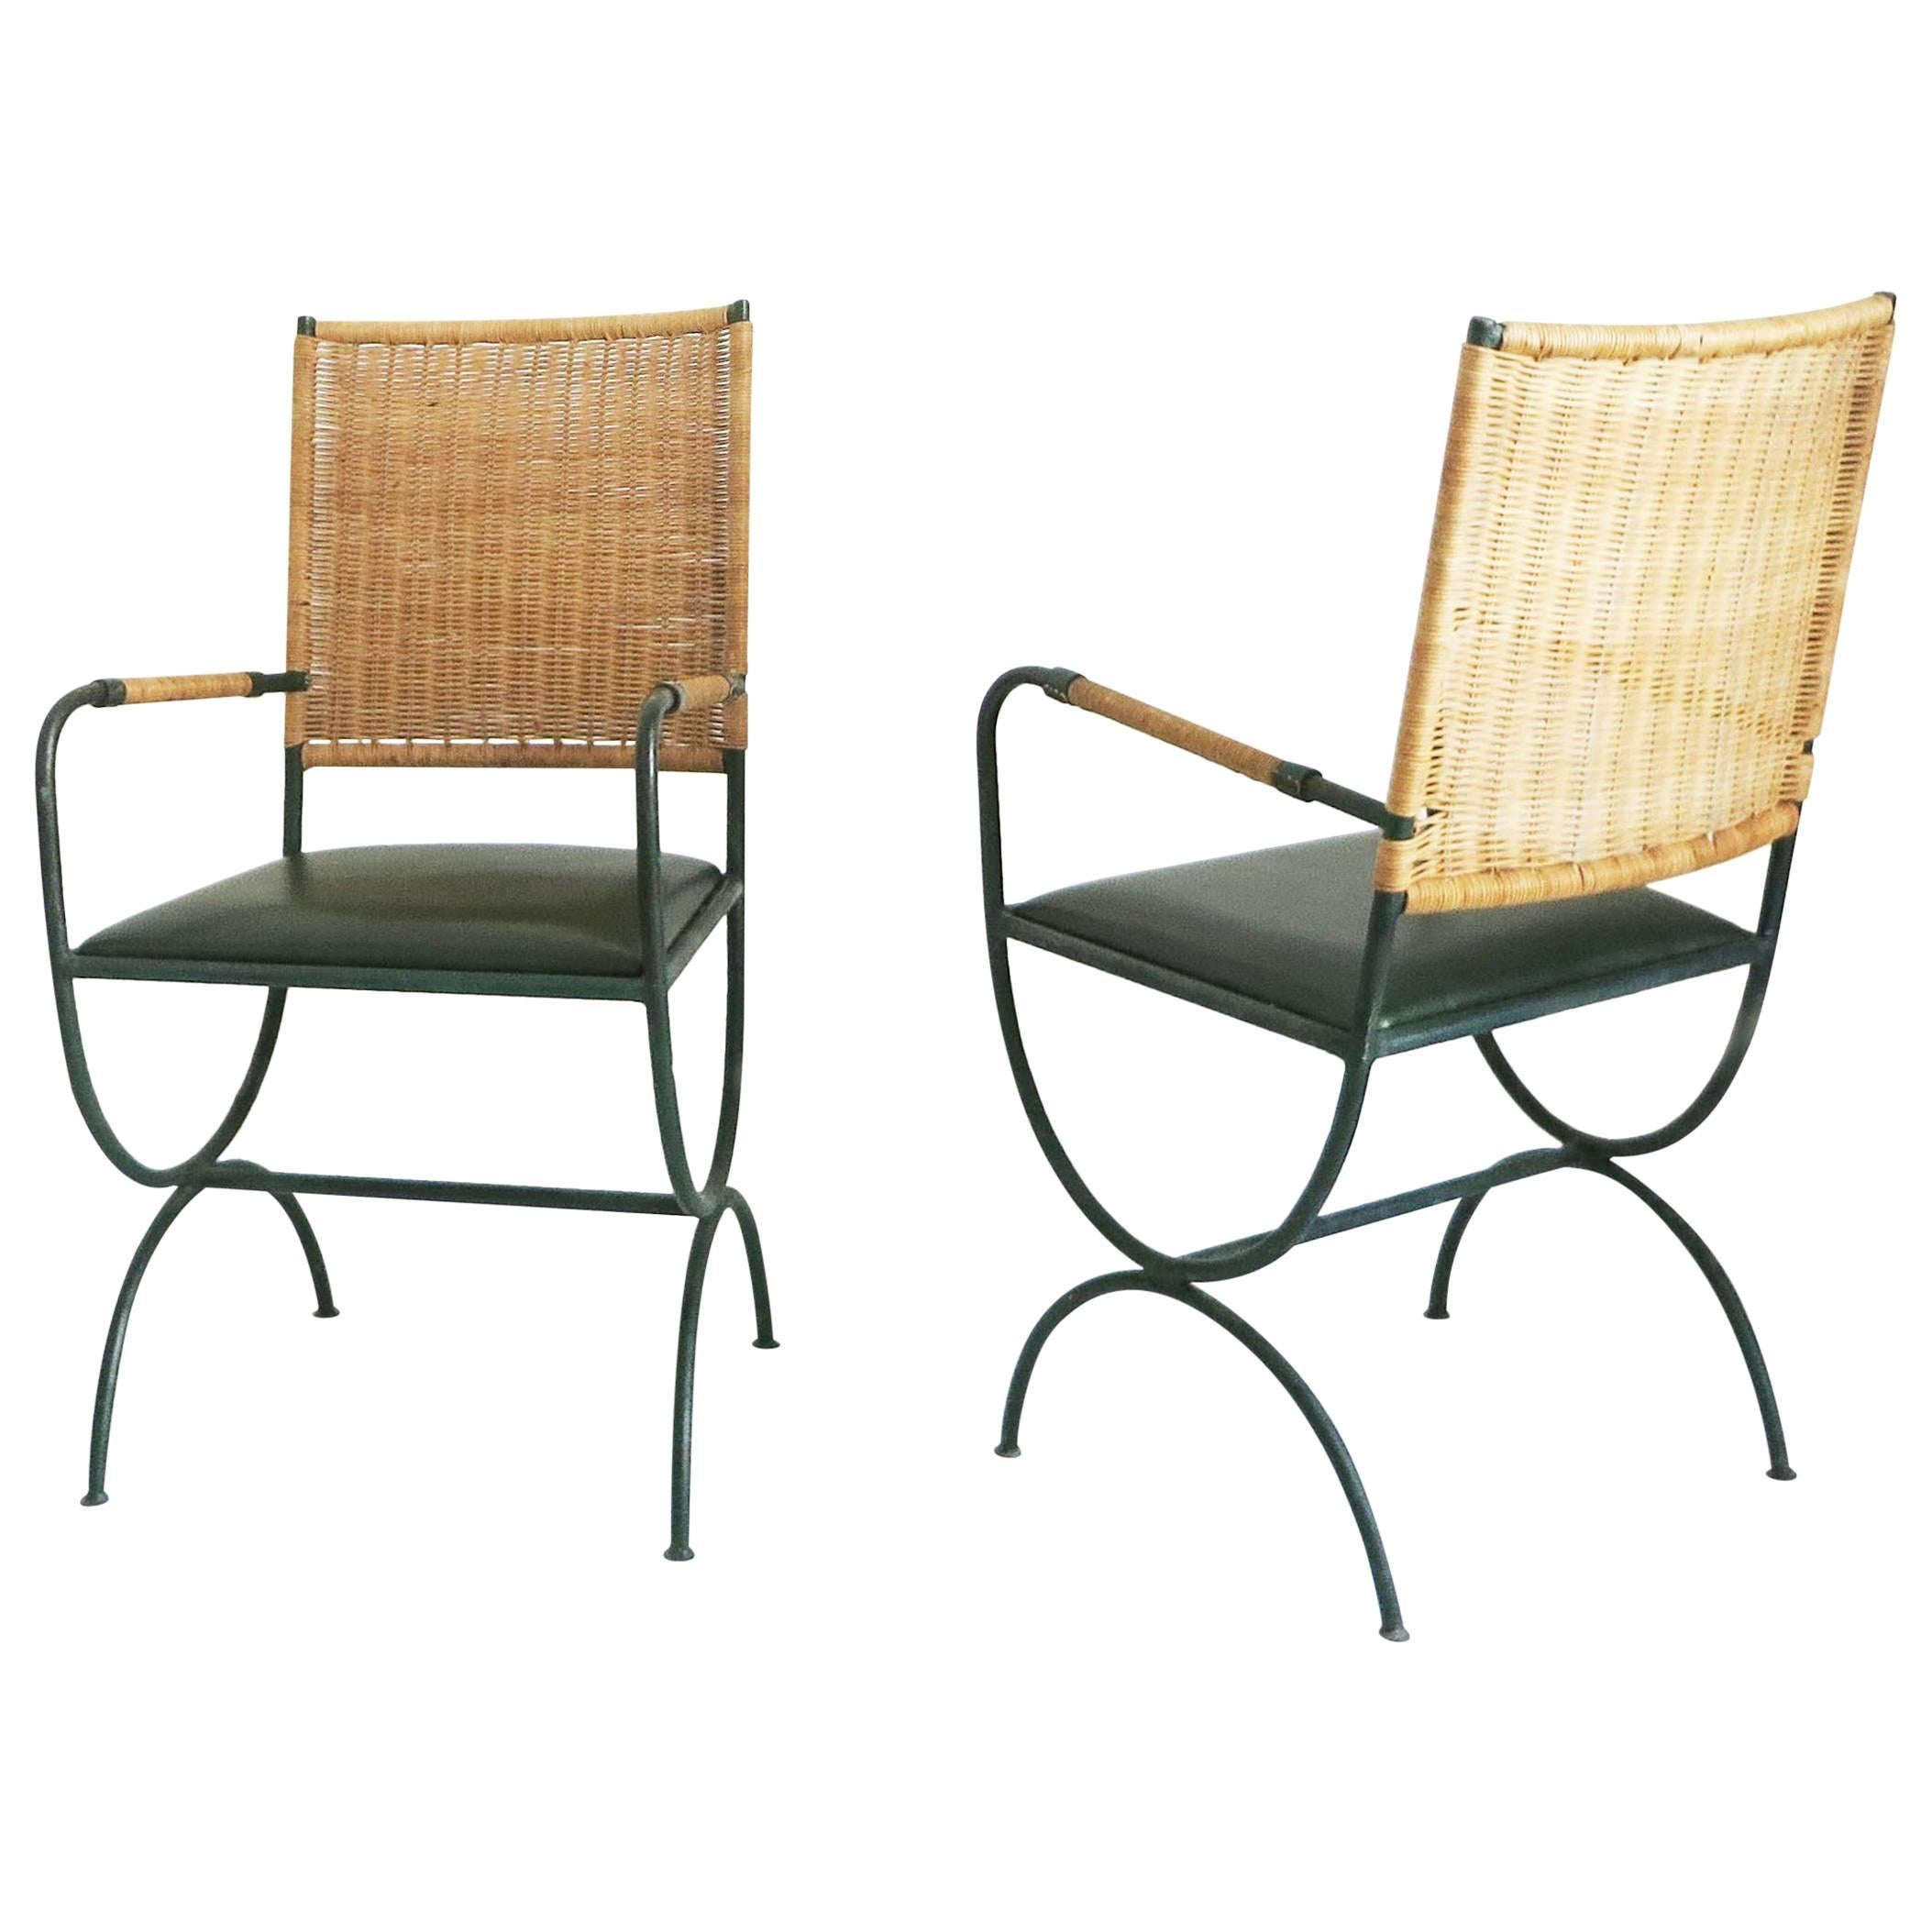 Pair of Jacques Adnet Chairs, Wicker, Leather and Iron, 1950s